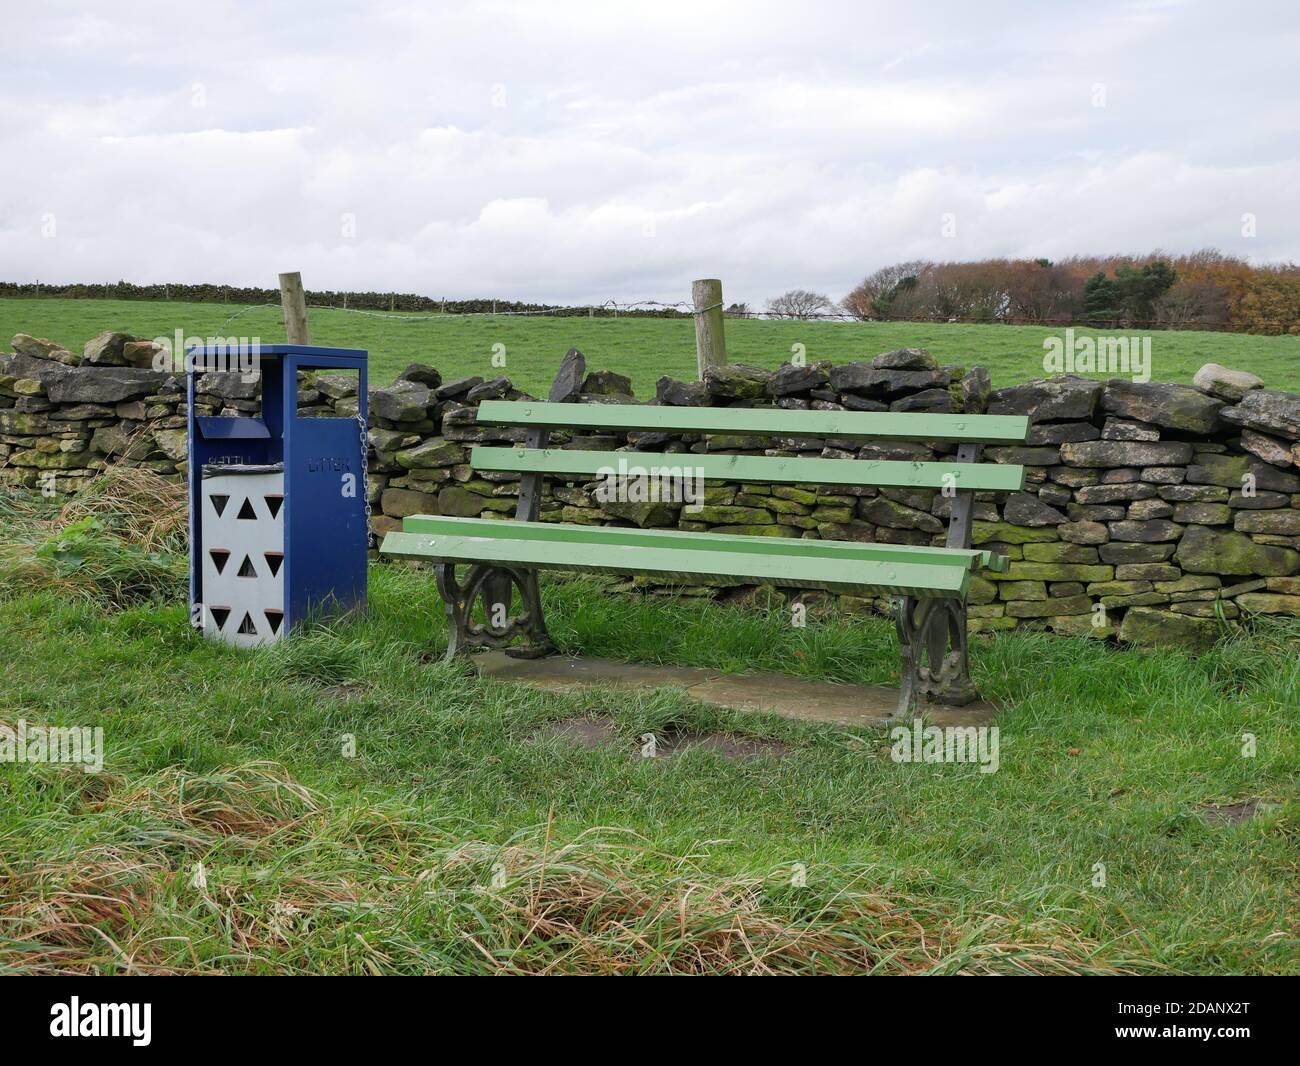 Green and black park bench grey and blue litter bin stood on grass in front of dry stone wall with trees and fields in the background Stock Photo